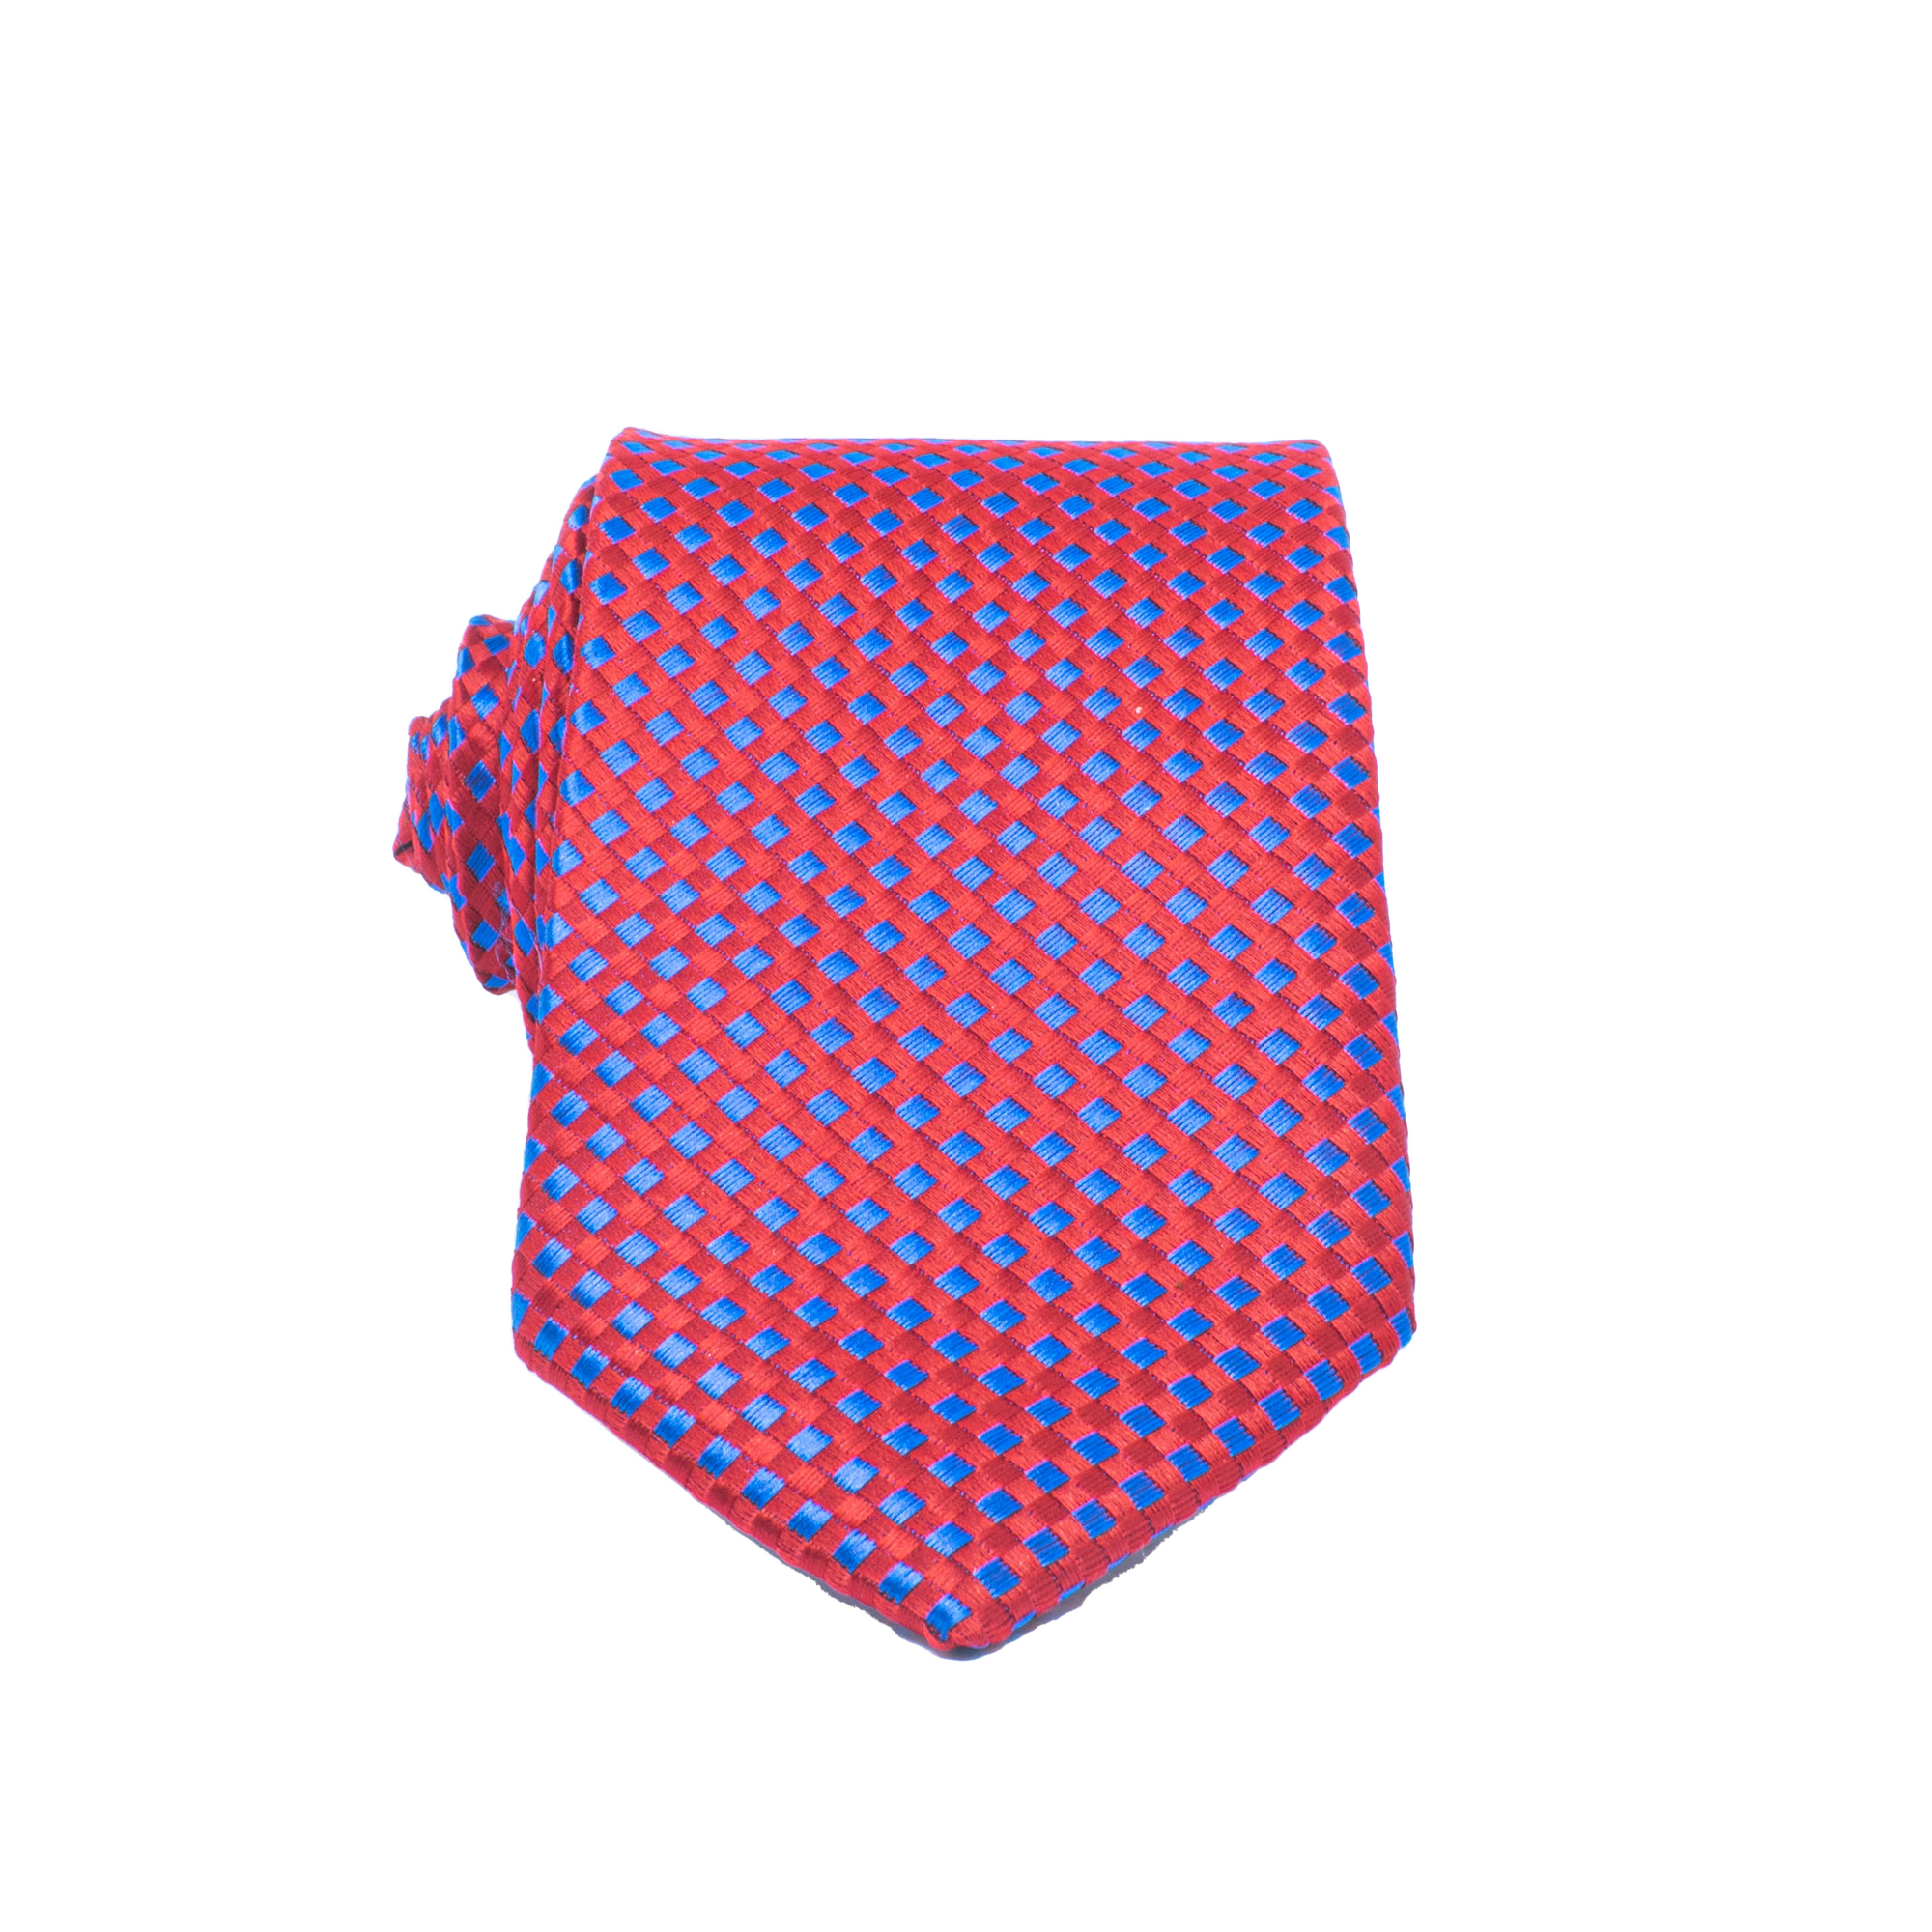 Mens Neck Tie - Red And Blue Crosshatch